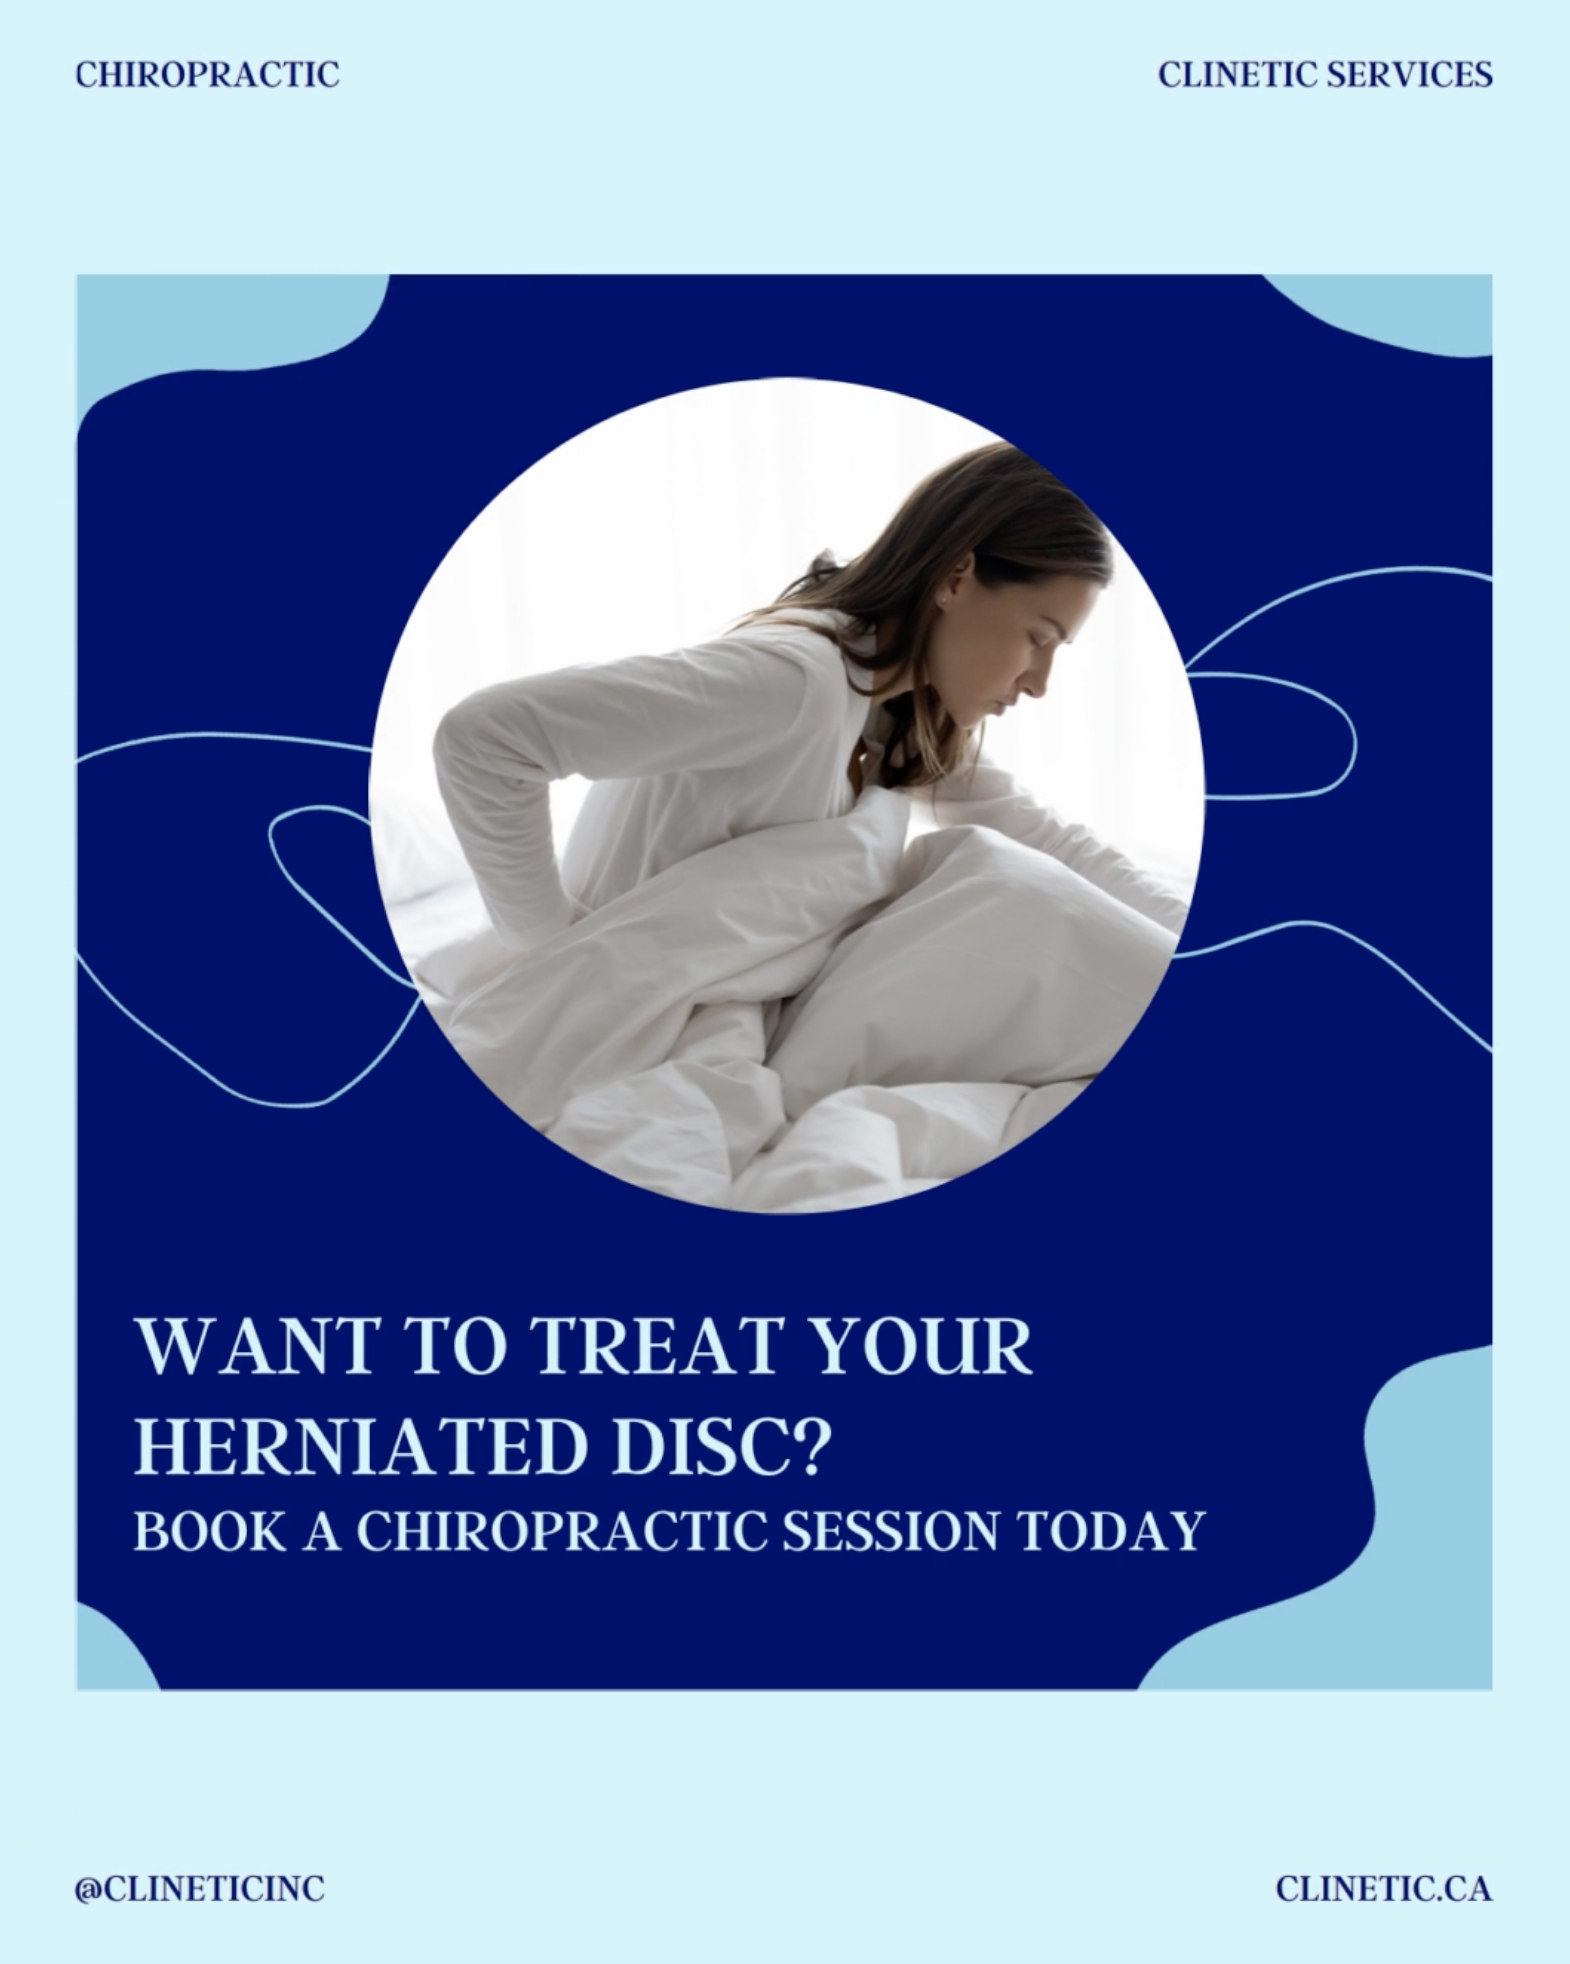 Want to treat your herniated disc?